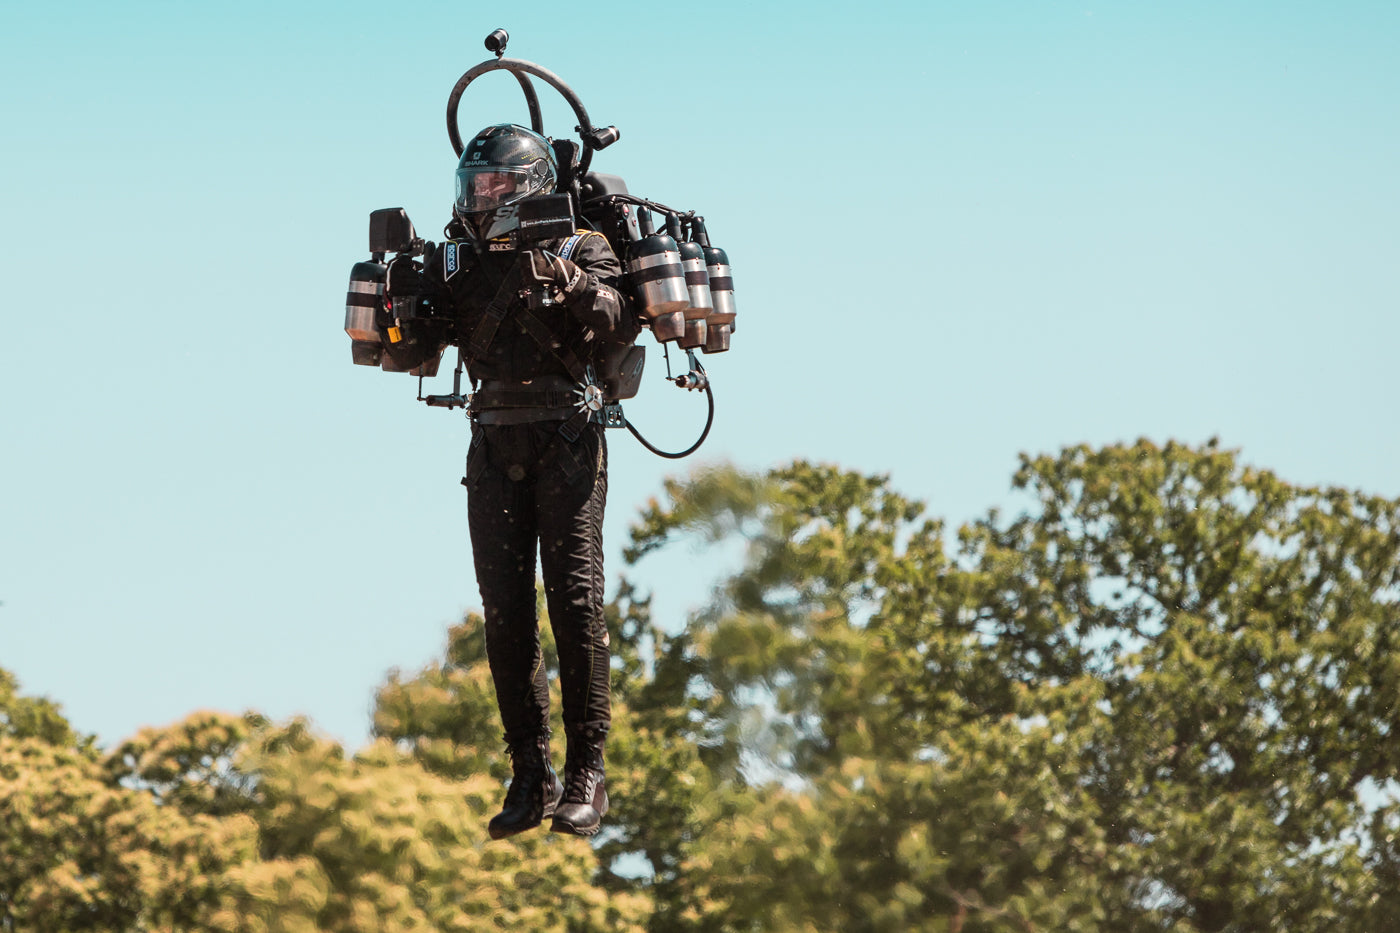 On every of the four days during the Goodwood Festival of Speed, a man with a jet pack flew over the race track. (Photo: Alex Lawrence – The White Wall 2018)